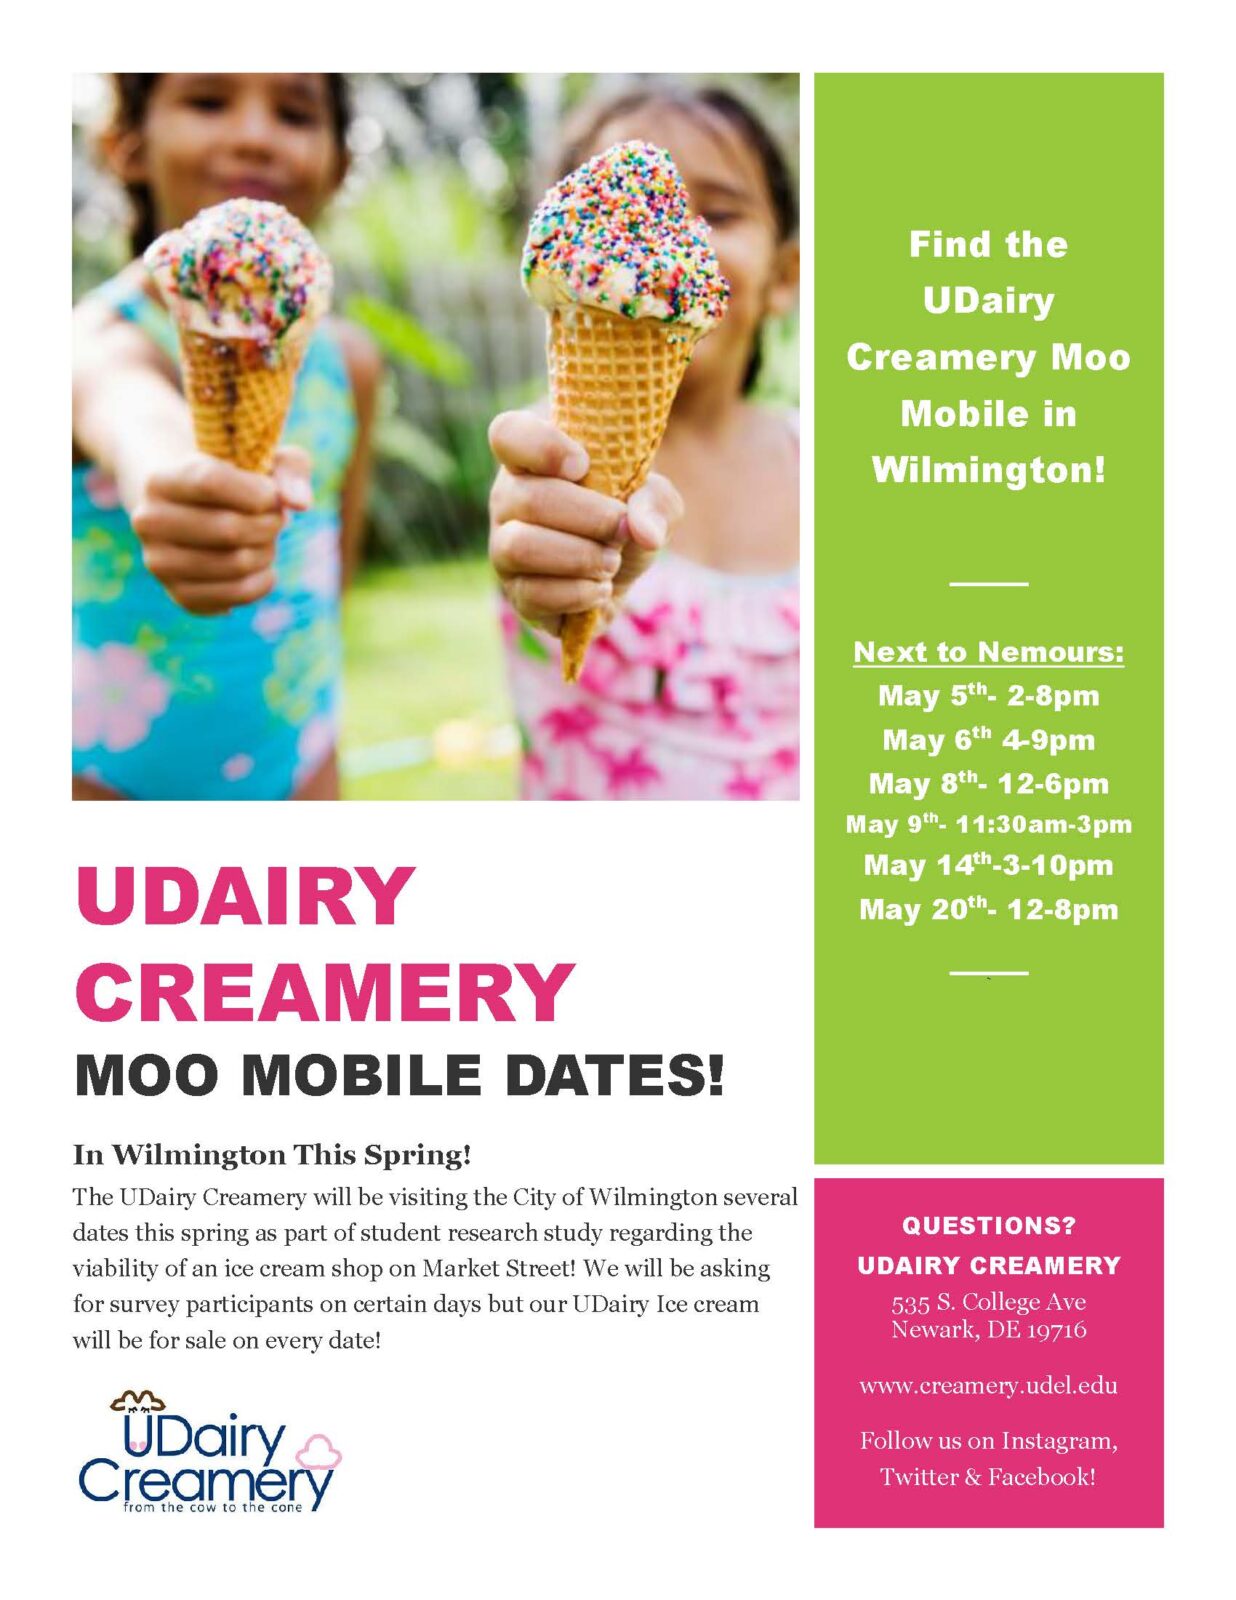 Wish UDairy Creamery Would Open an Ice Cream Parlor on Market Street? Look for the ‘Moo Mobile’ This May!